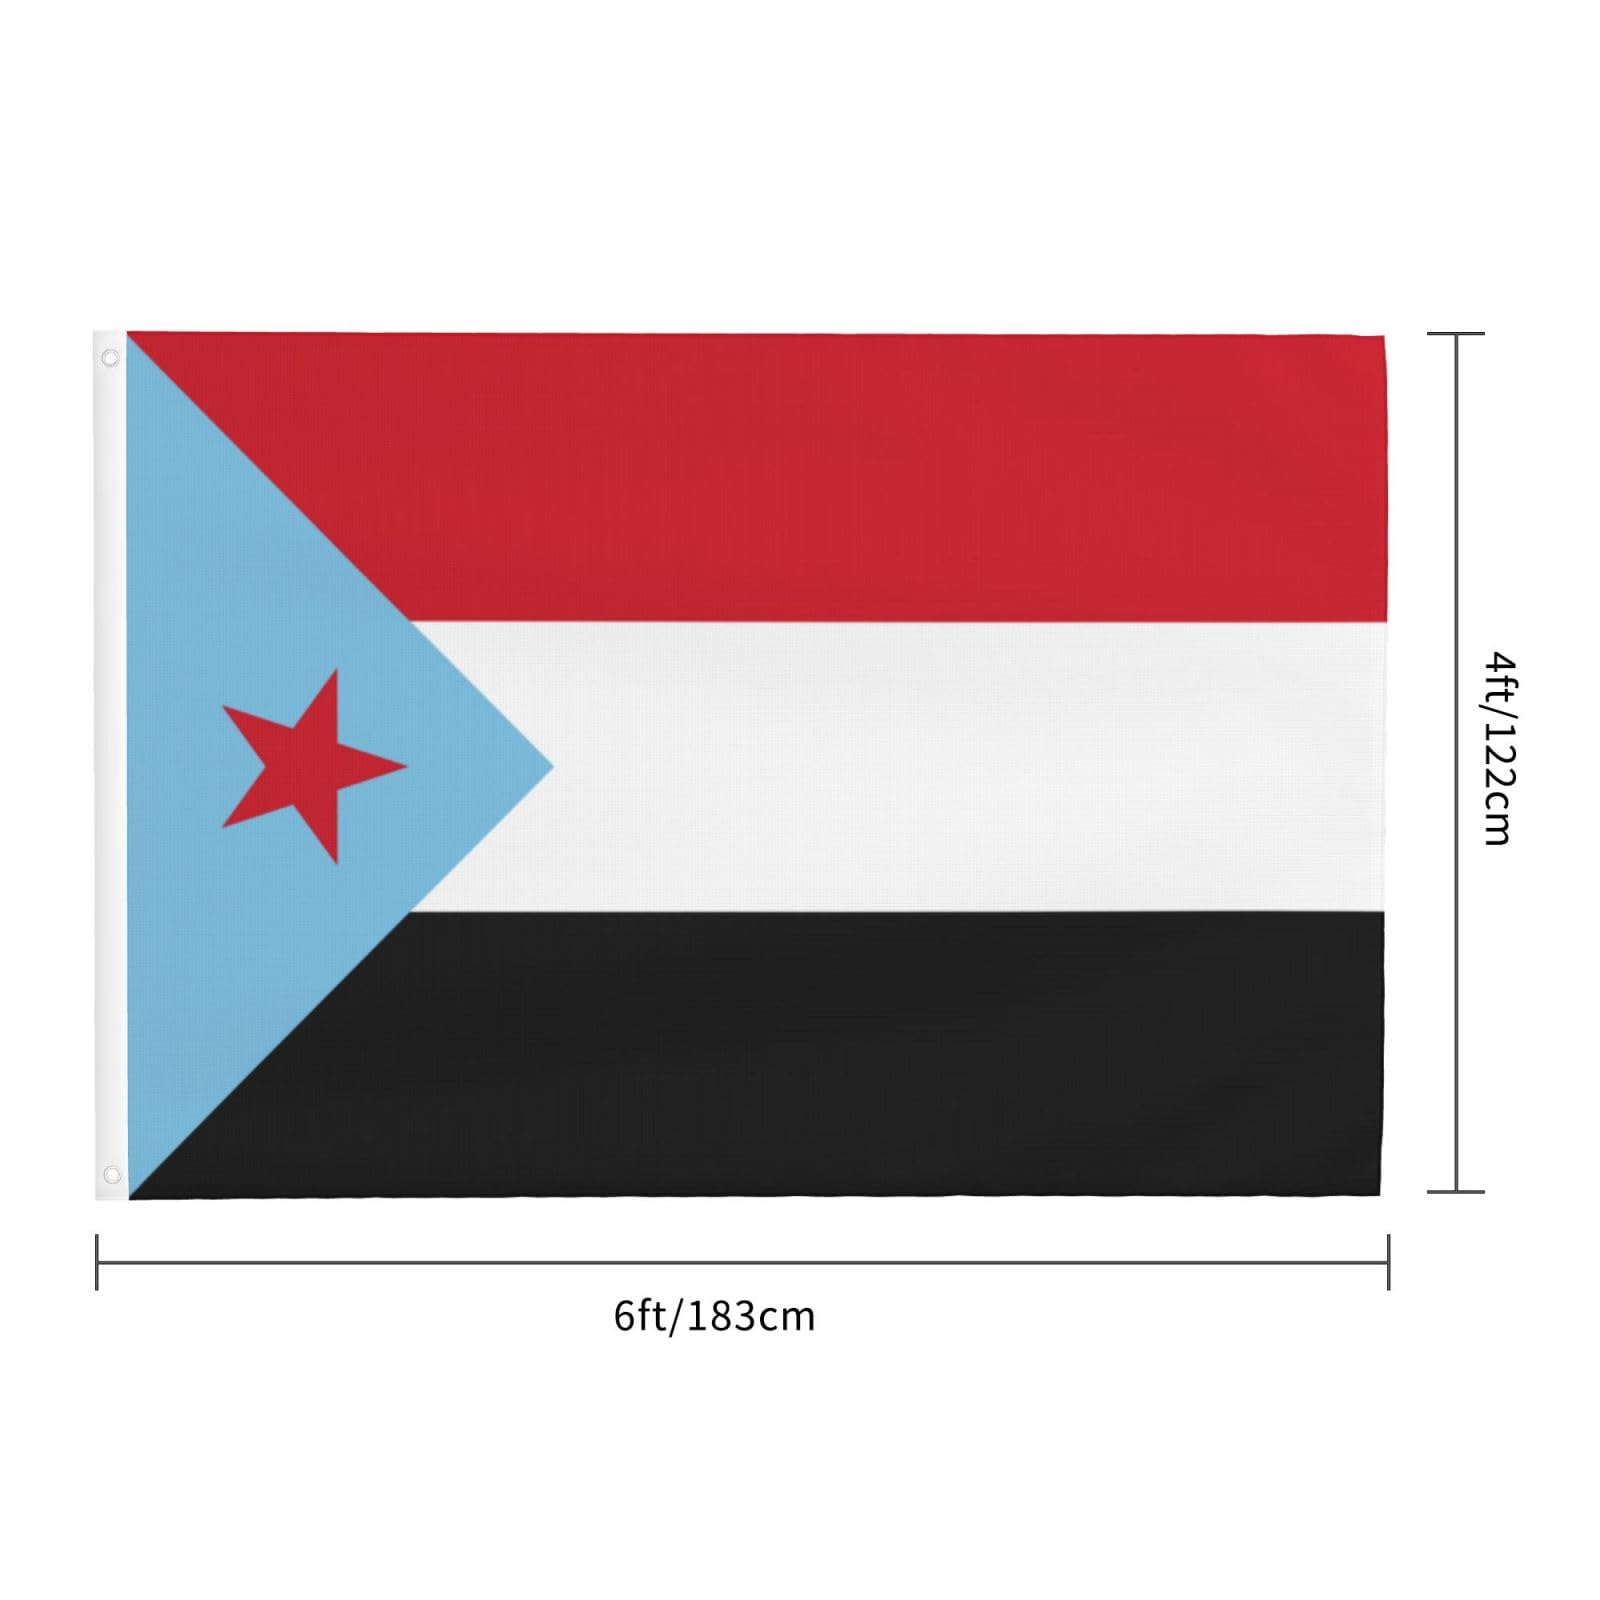 Qizyoqa flag of south yemen flag x ft double sided flags outdoor durable banner home yard decoration flag by flags patio lawn garden